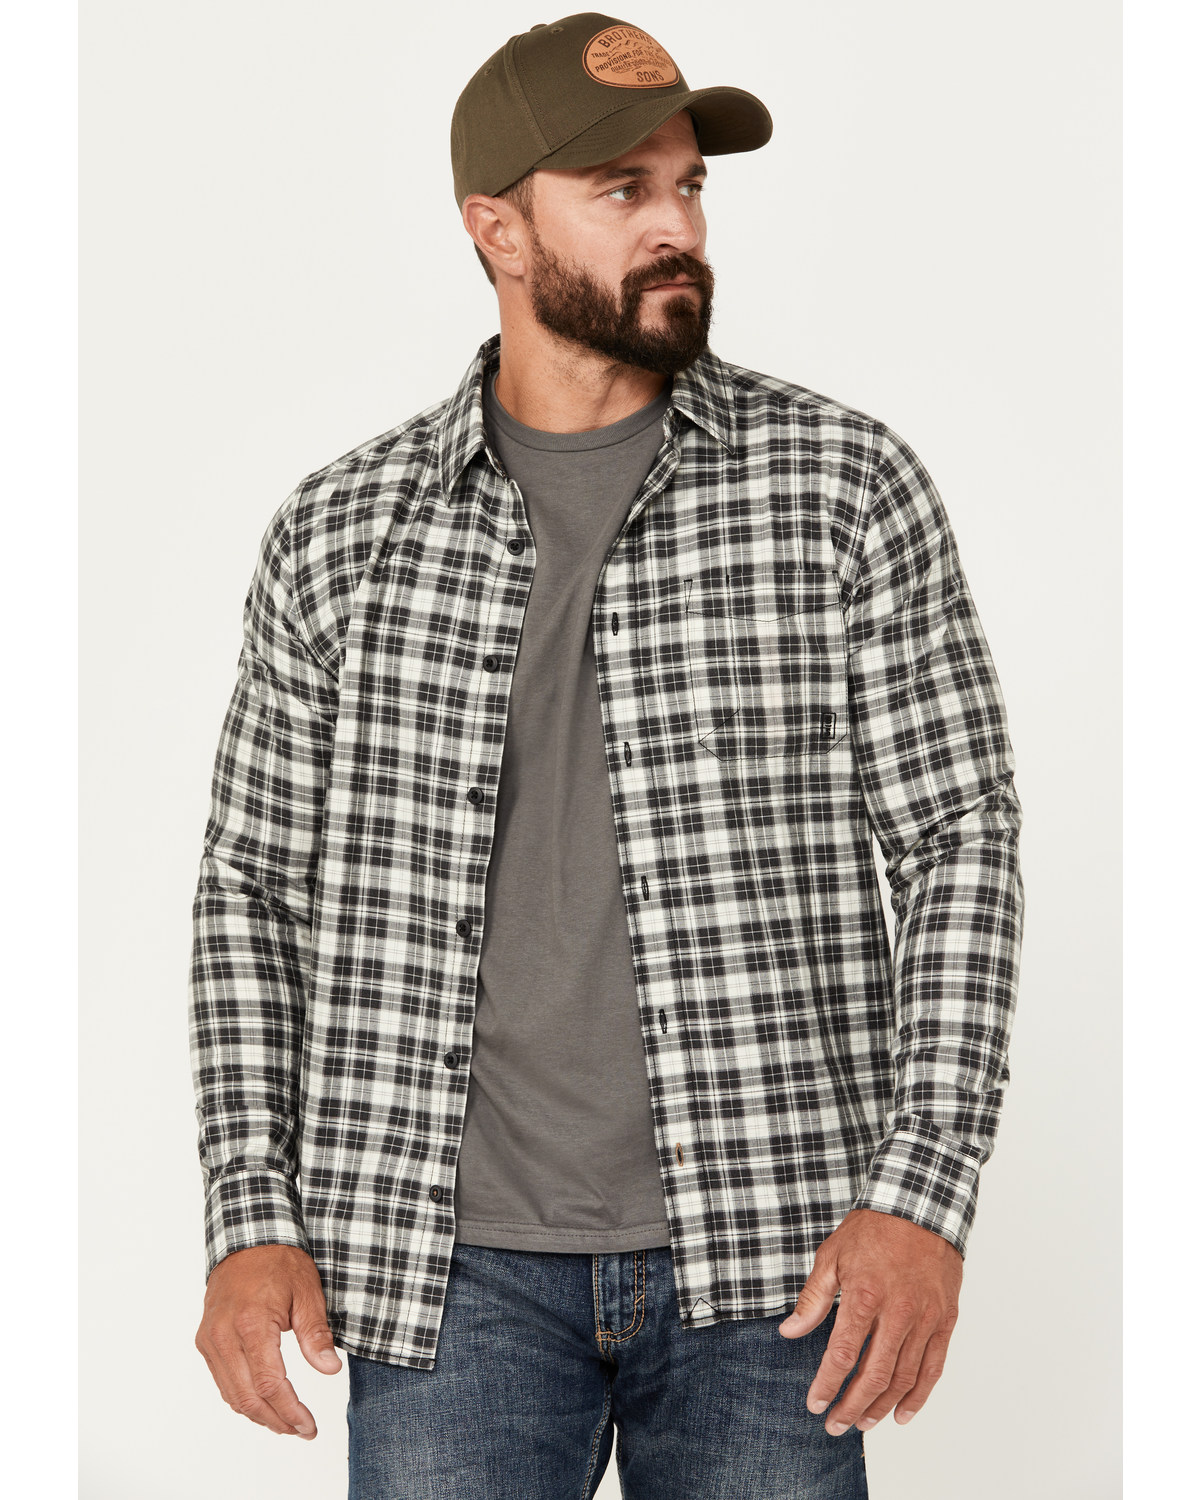 Brothers and Sons Men's Custer Herringbone Long Sleeve Button-Down Shirt